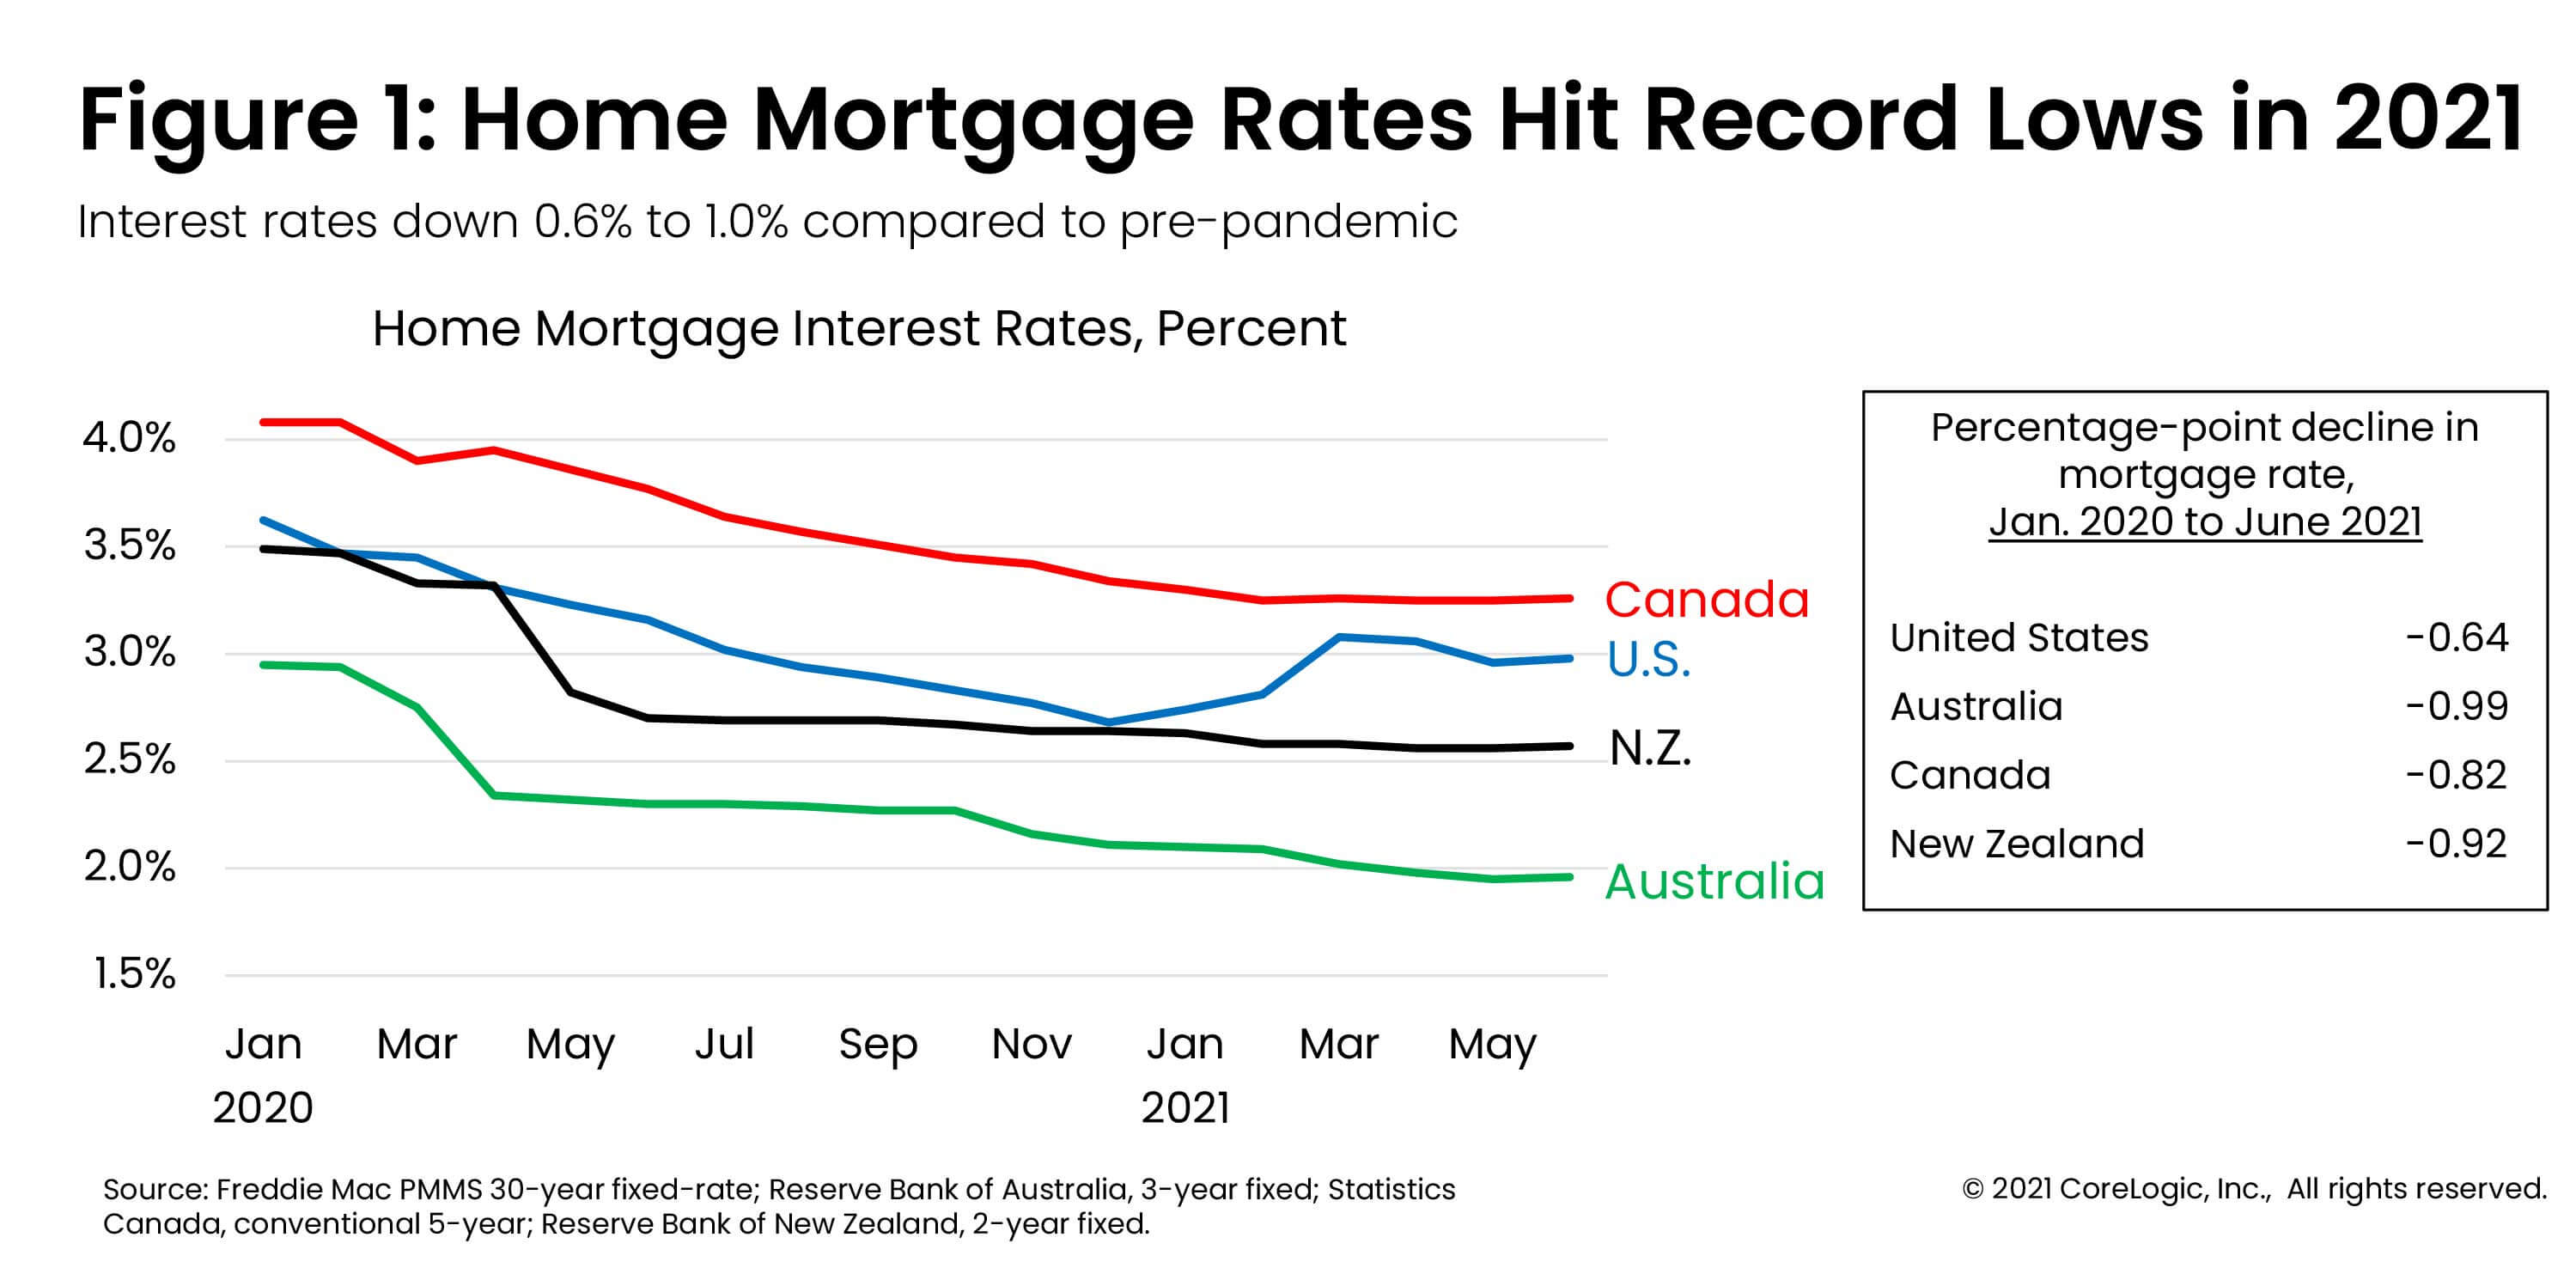 Figure 1 Home Mortgage Rates Hit Record Lows in 2021